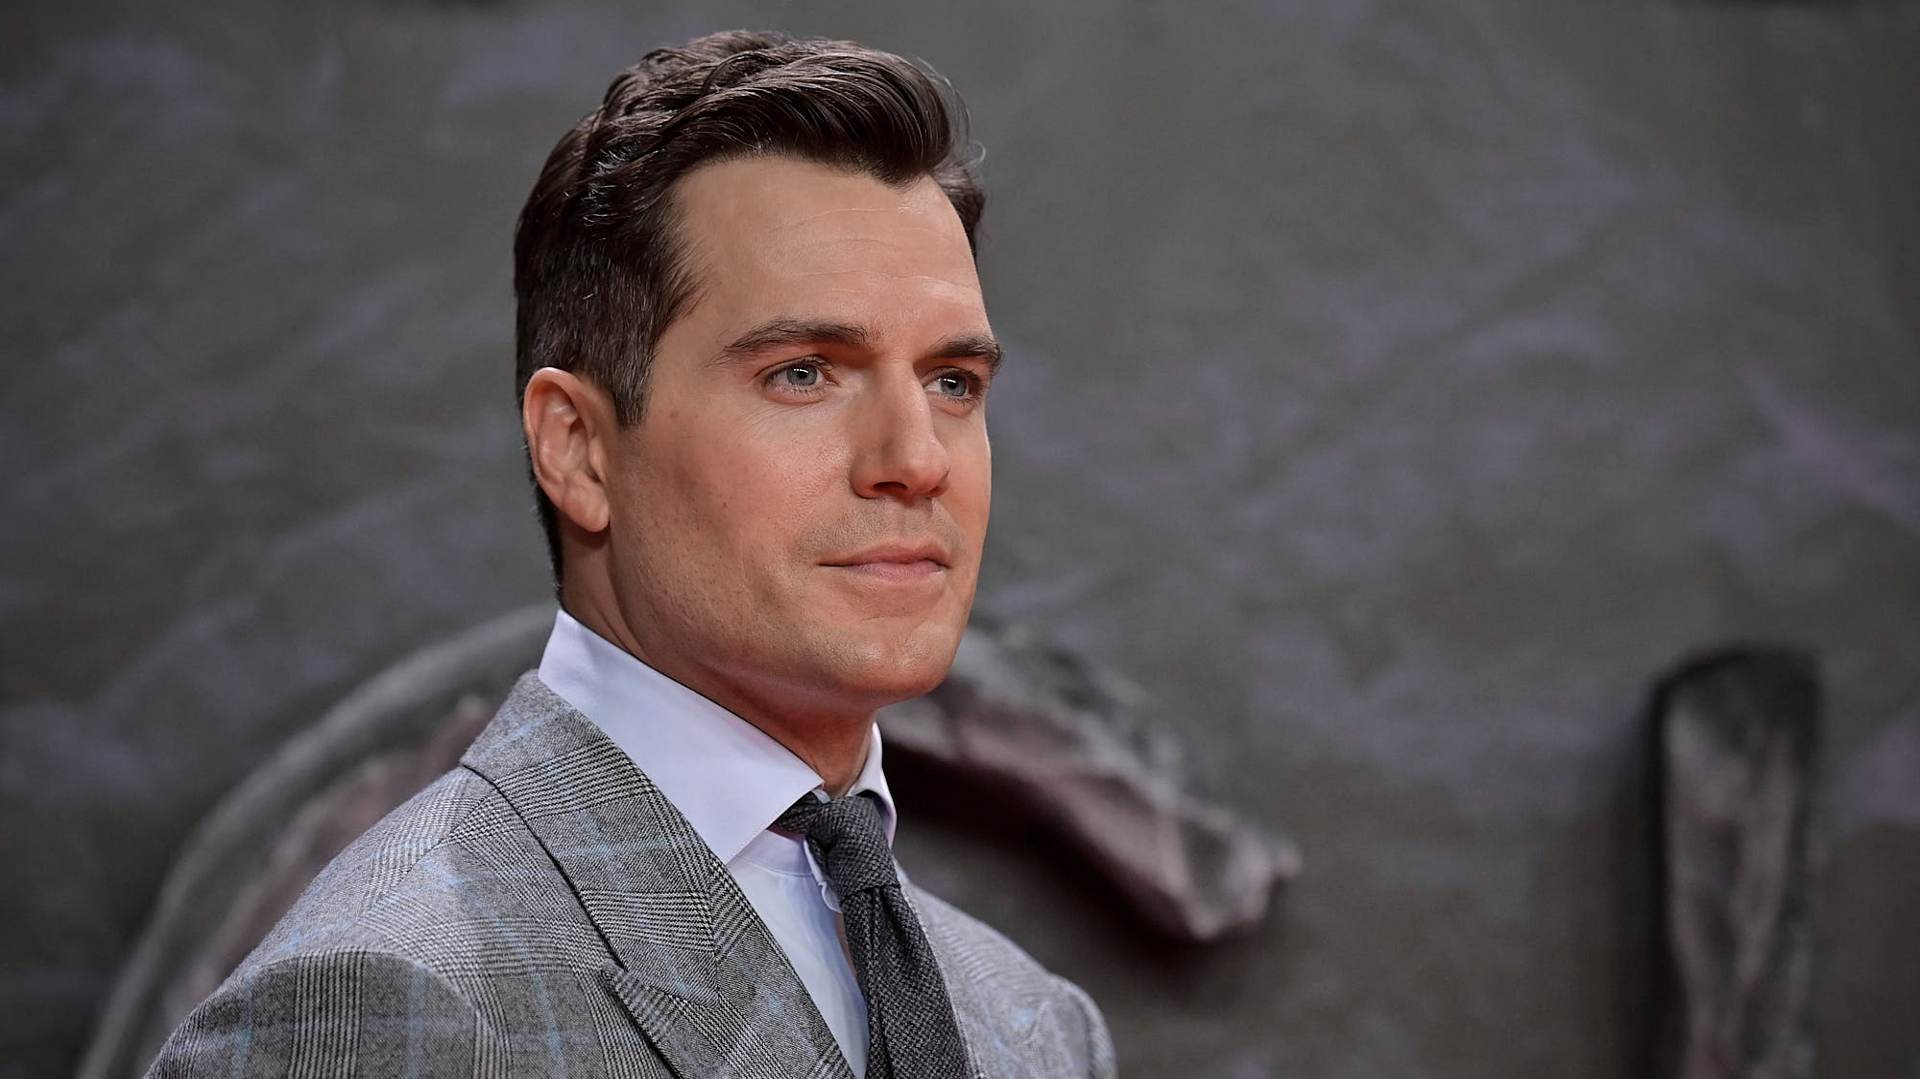 Henry Cavill's Goal for Superman Return Is to Inspire Fans